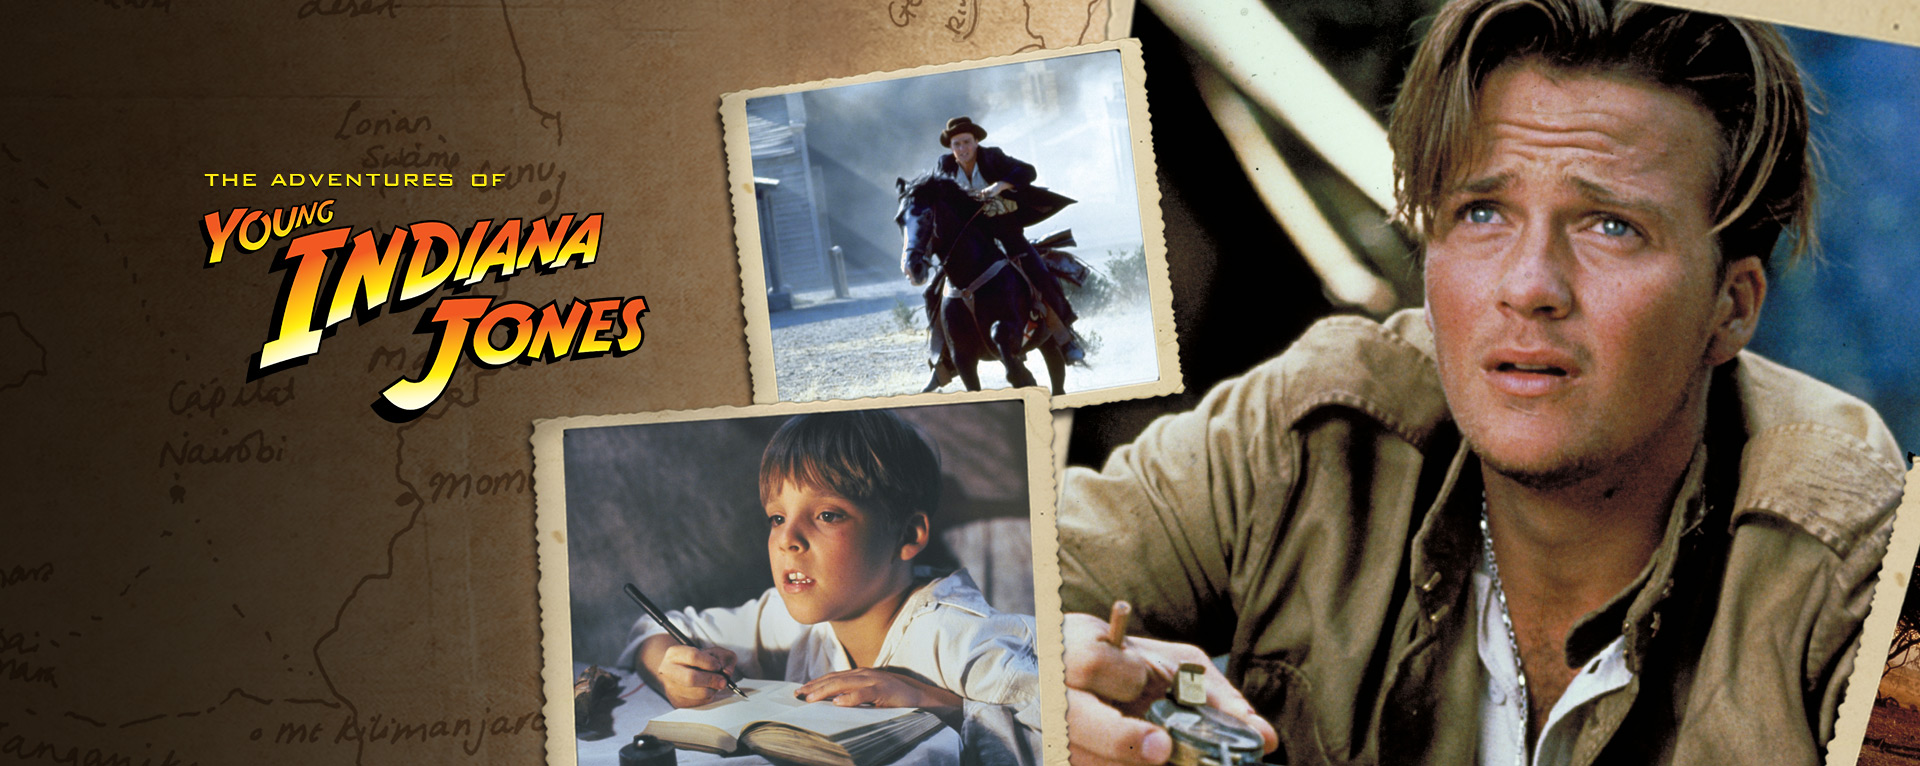 Indiana Jones Collection Coming Soon To Disney+ – What's On Disney Plus